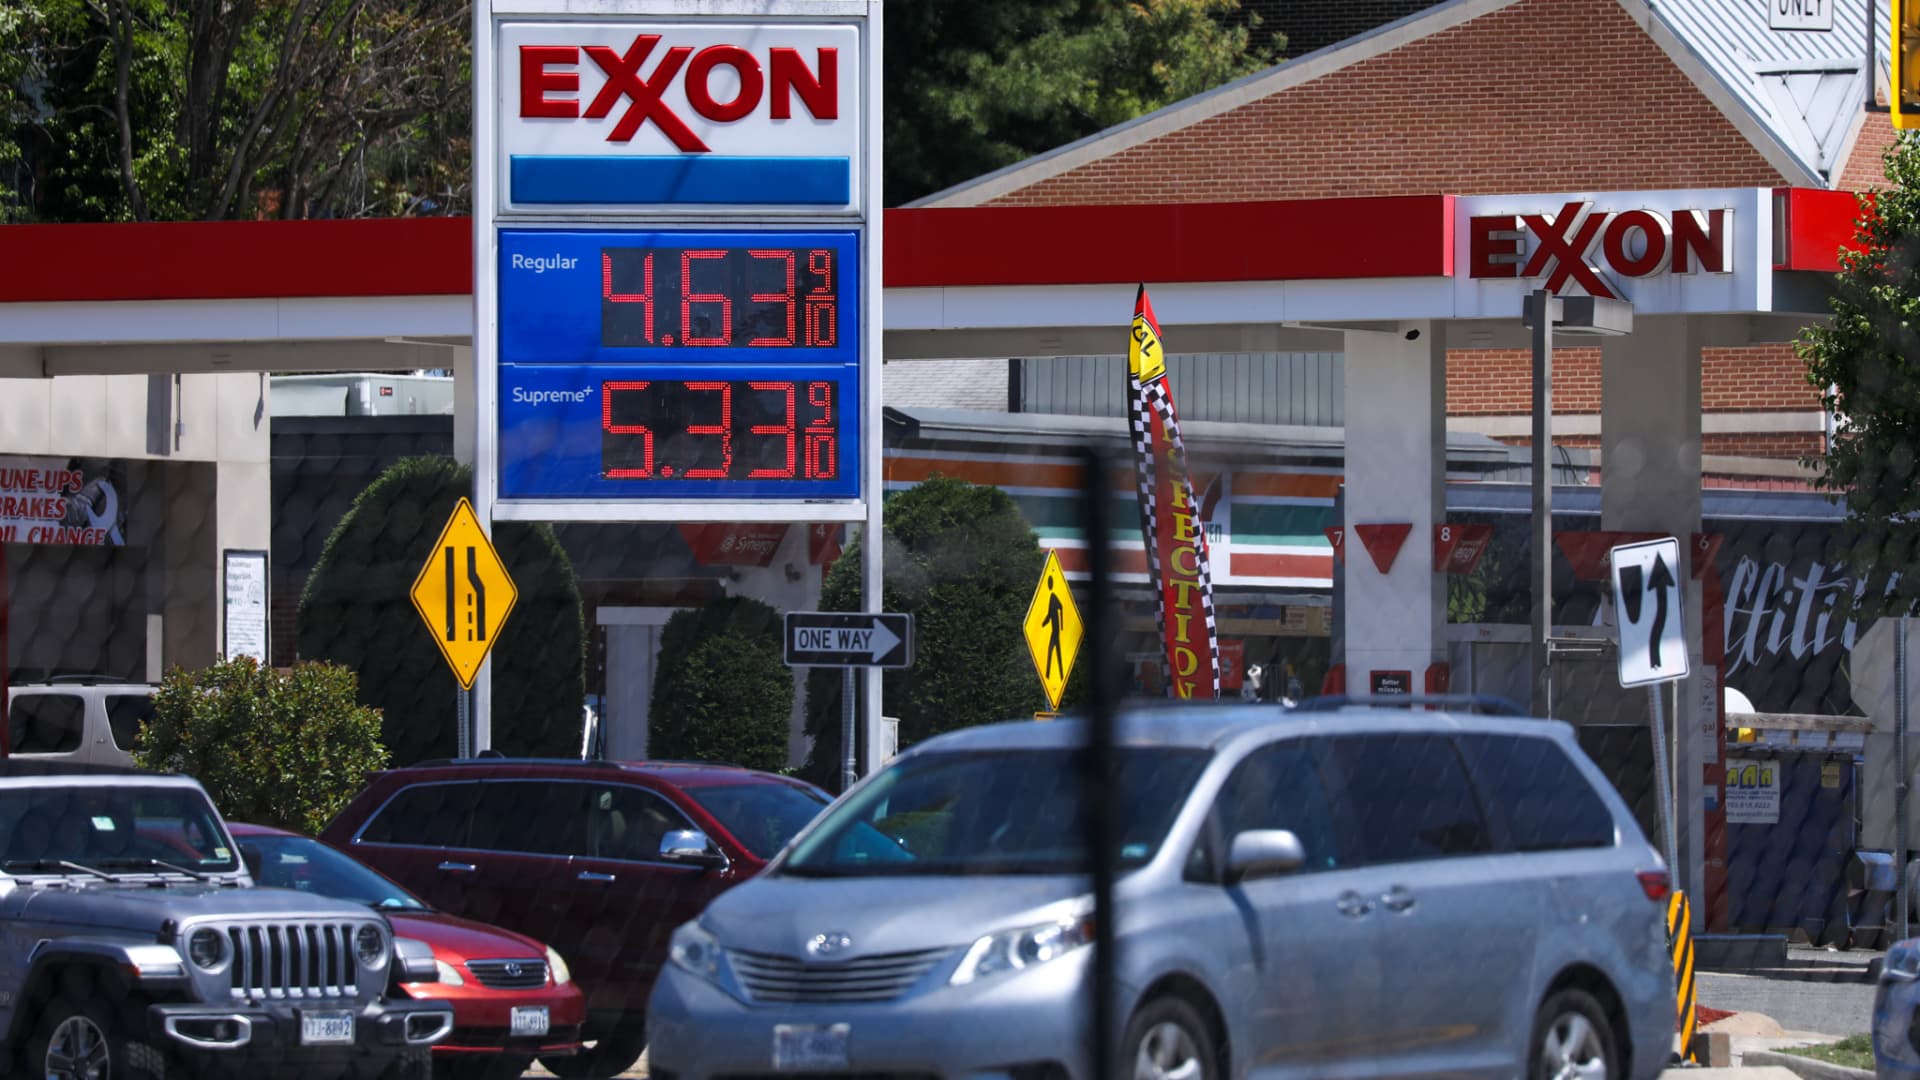 Record high Memorial Day gas prices are stinging consumers and impacting travel